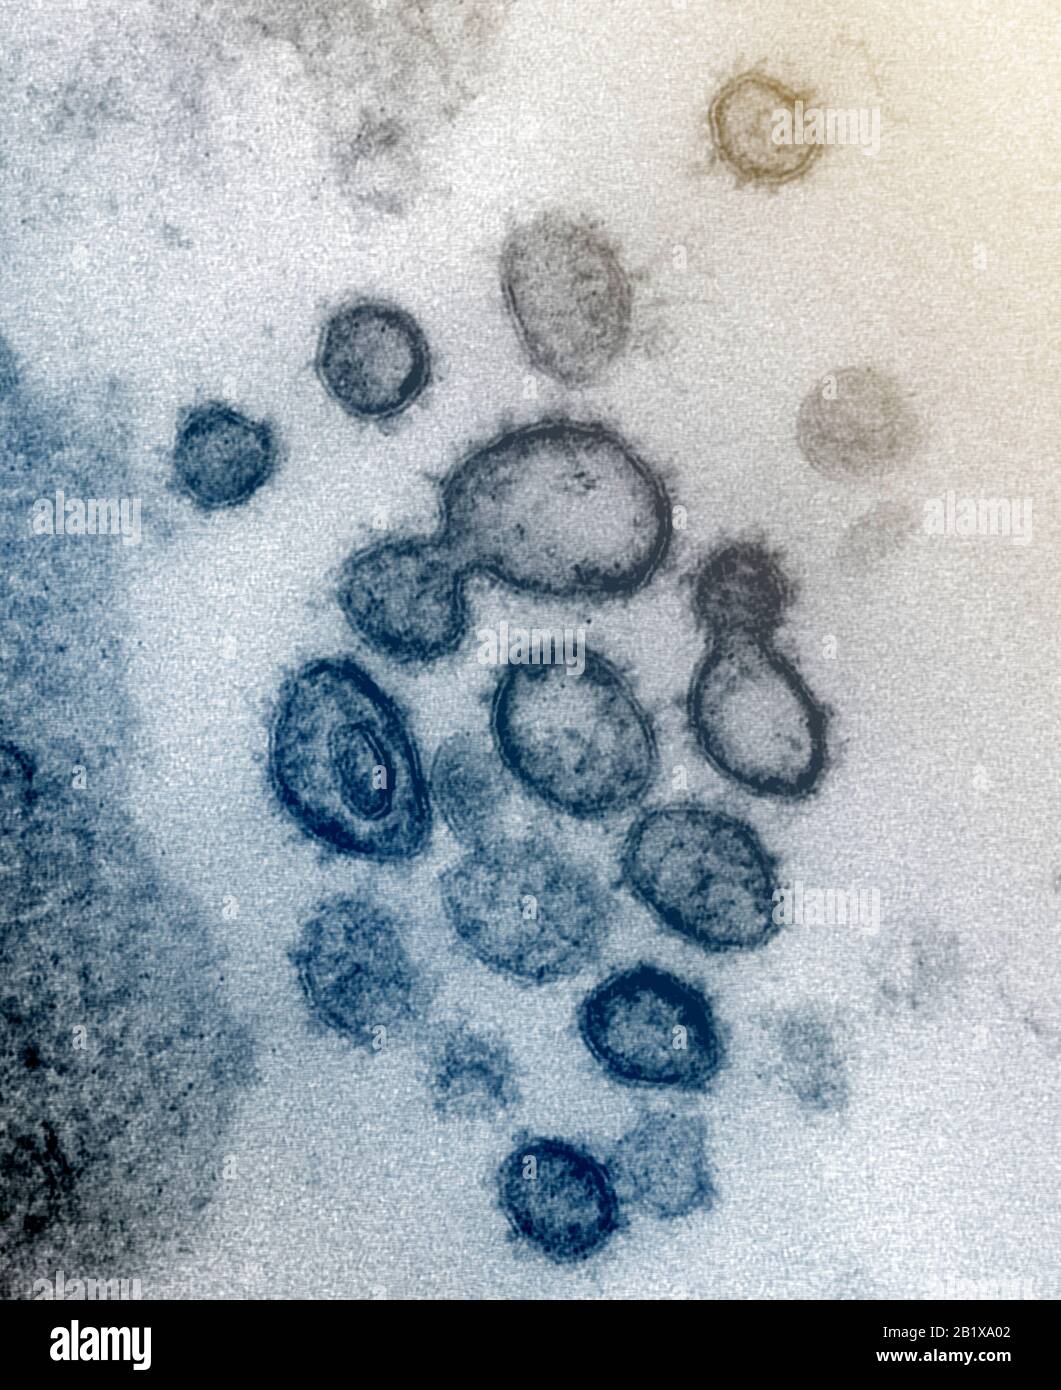 COVID-19. Novel Coronavirus SARS-CoV-2  This transmission electron microscope image shows SARS-CoV-2—also known as 2019-nCoV, the virus that causes COVID-19—isolated from a patient in the U.S. Virus particles are shown emerging from the surface of cells cultured in the lab. The spikes on the outer edge of the virus particles give coronaviruses their name, crown-like. Credit: NIAID-RML Stock Photo